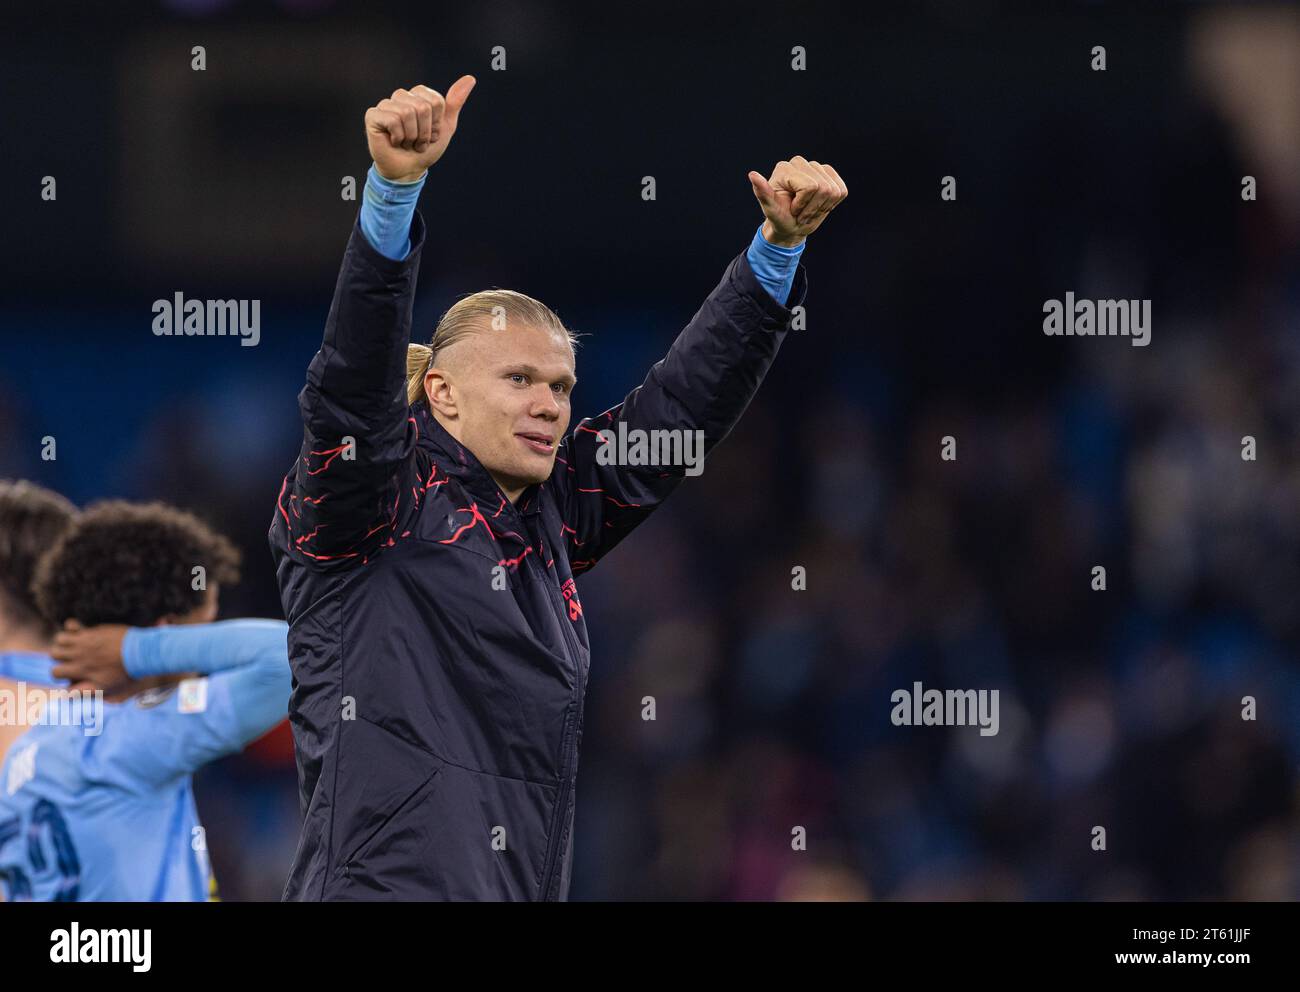 Manchester, UK. 8th Nov, 2023. Manchester City's Erling Haaland celebrates after the UEFA Champions League Group G match between Manchester City FC and BSC Young Boys in Manchester, Britain, on Nov. 7, 2023. Credit: Xinhua/Alamy Live News Stock Photo